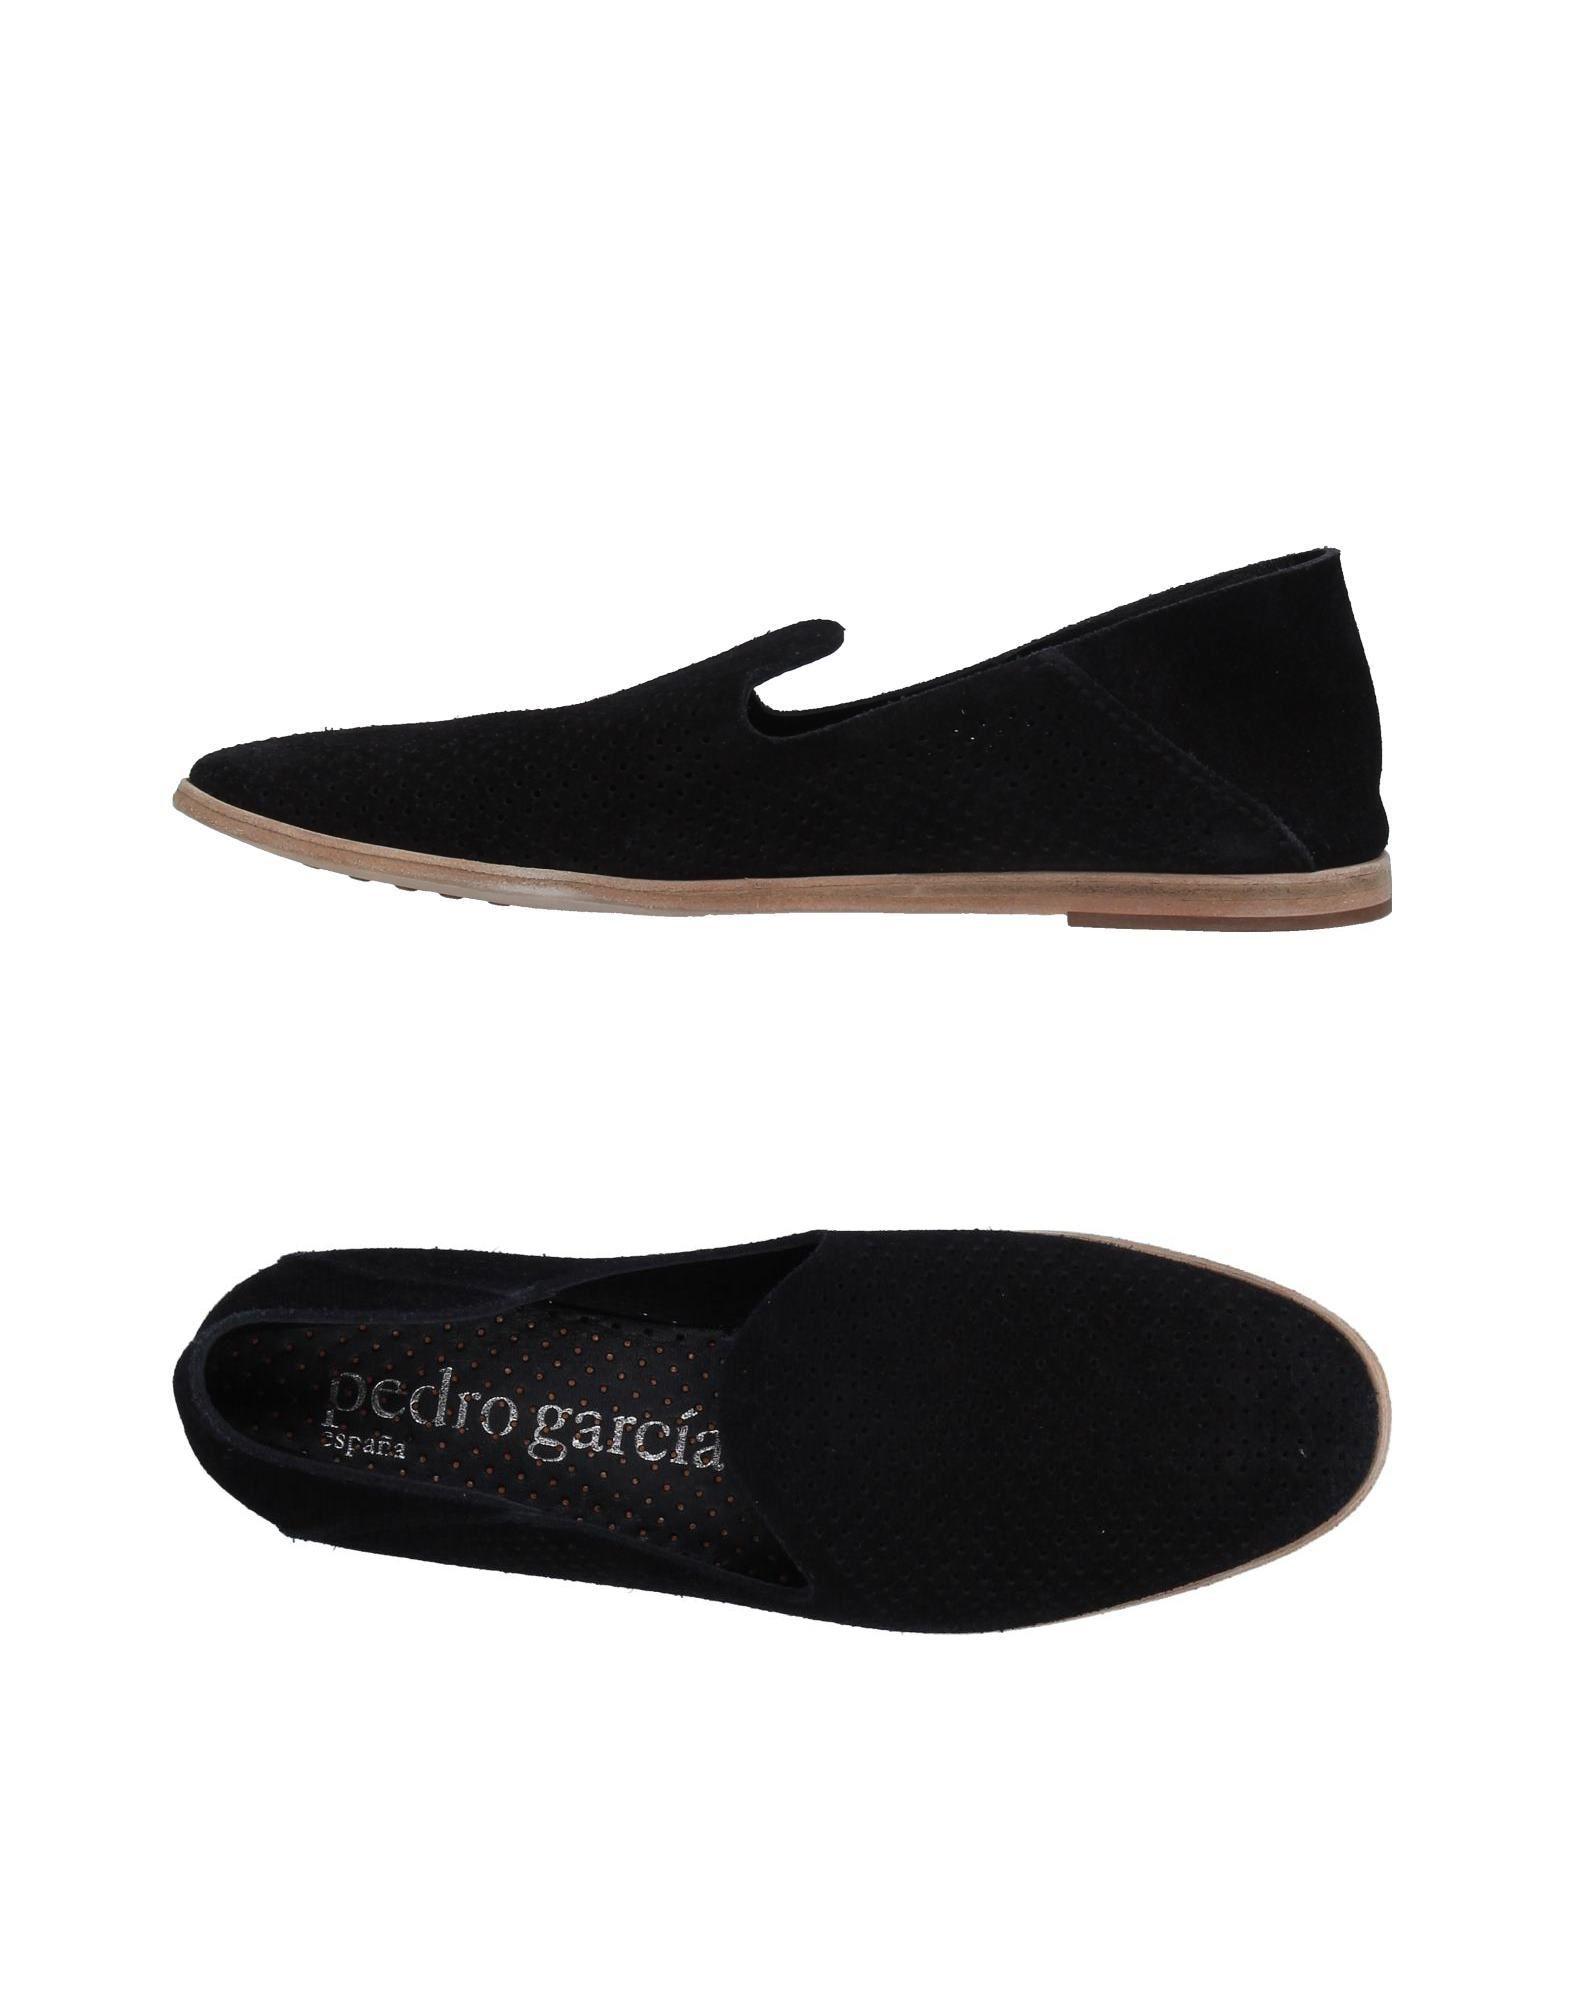 Pedro Garcia Leather Loafer in Black - Lyst